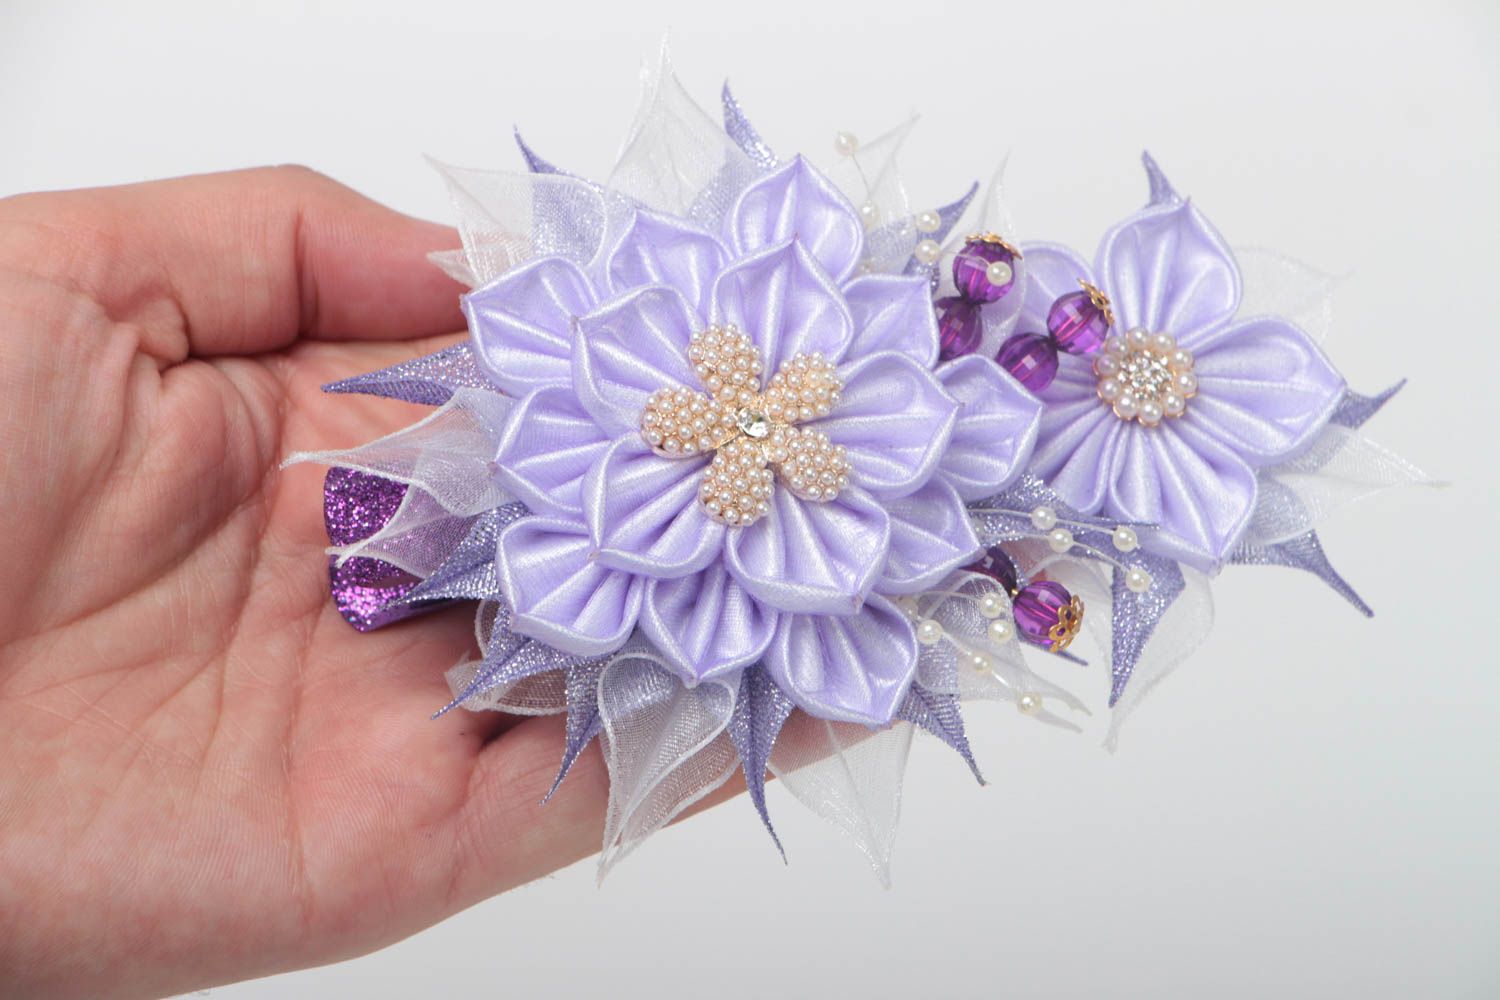 Handcrafted textile flower barrette kanzashi ideas handmade gifts for her photo 5